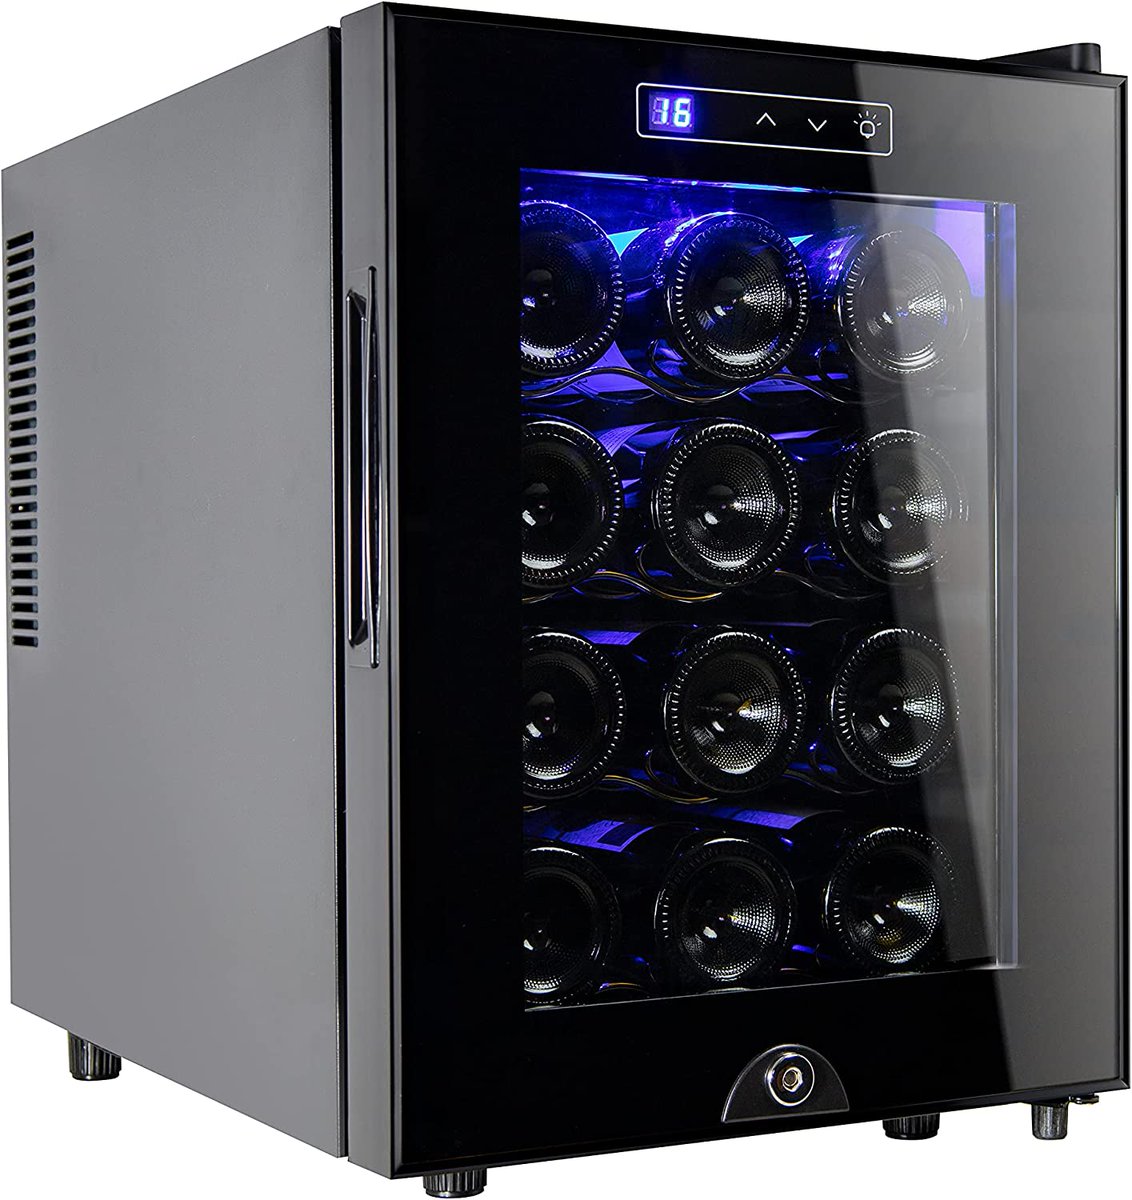 Best Mini Refrigerator With Glass Door in 2022, Tested In Our Lab
wildriverreview.com/best-mini.../...
#household #home #electronics #appliances #kitchen #boschrefrigerator #outdoorrefrigerator #truckrefrigerator #undercounterrefrigerator #chestfreezer #portablerefrigerator